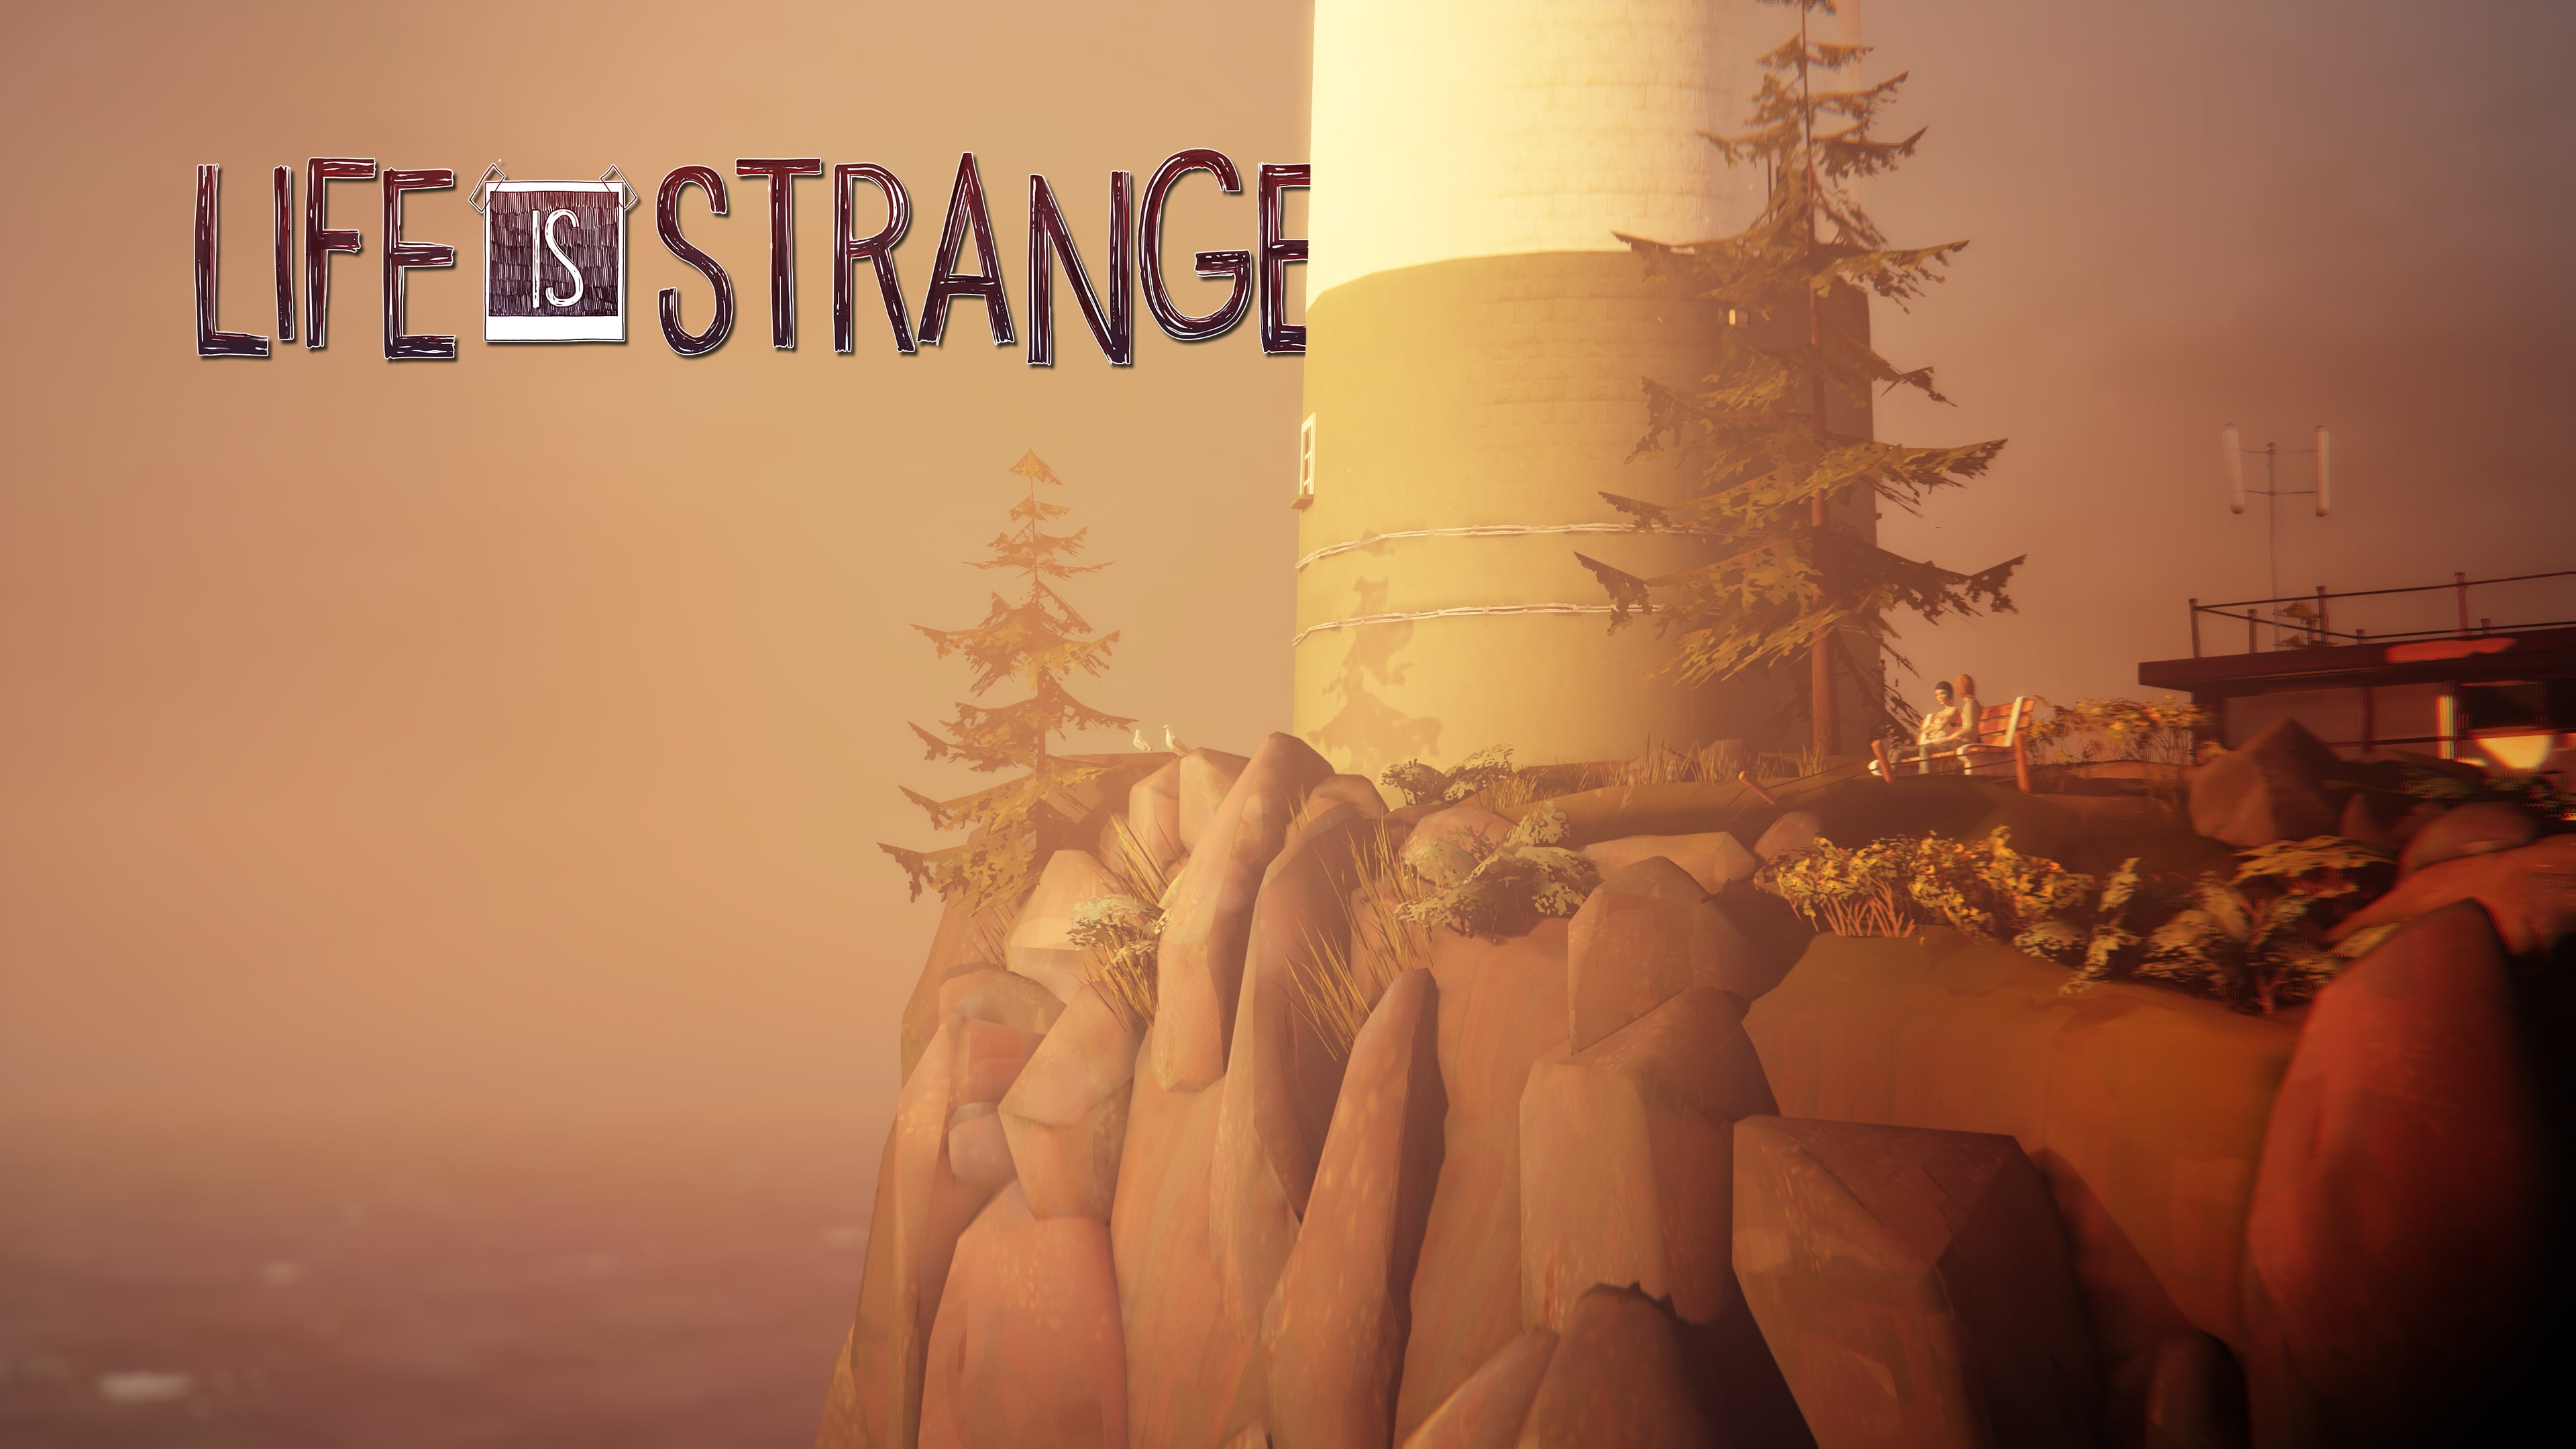 Life Is Strange game poster, communication, text, western script